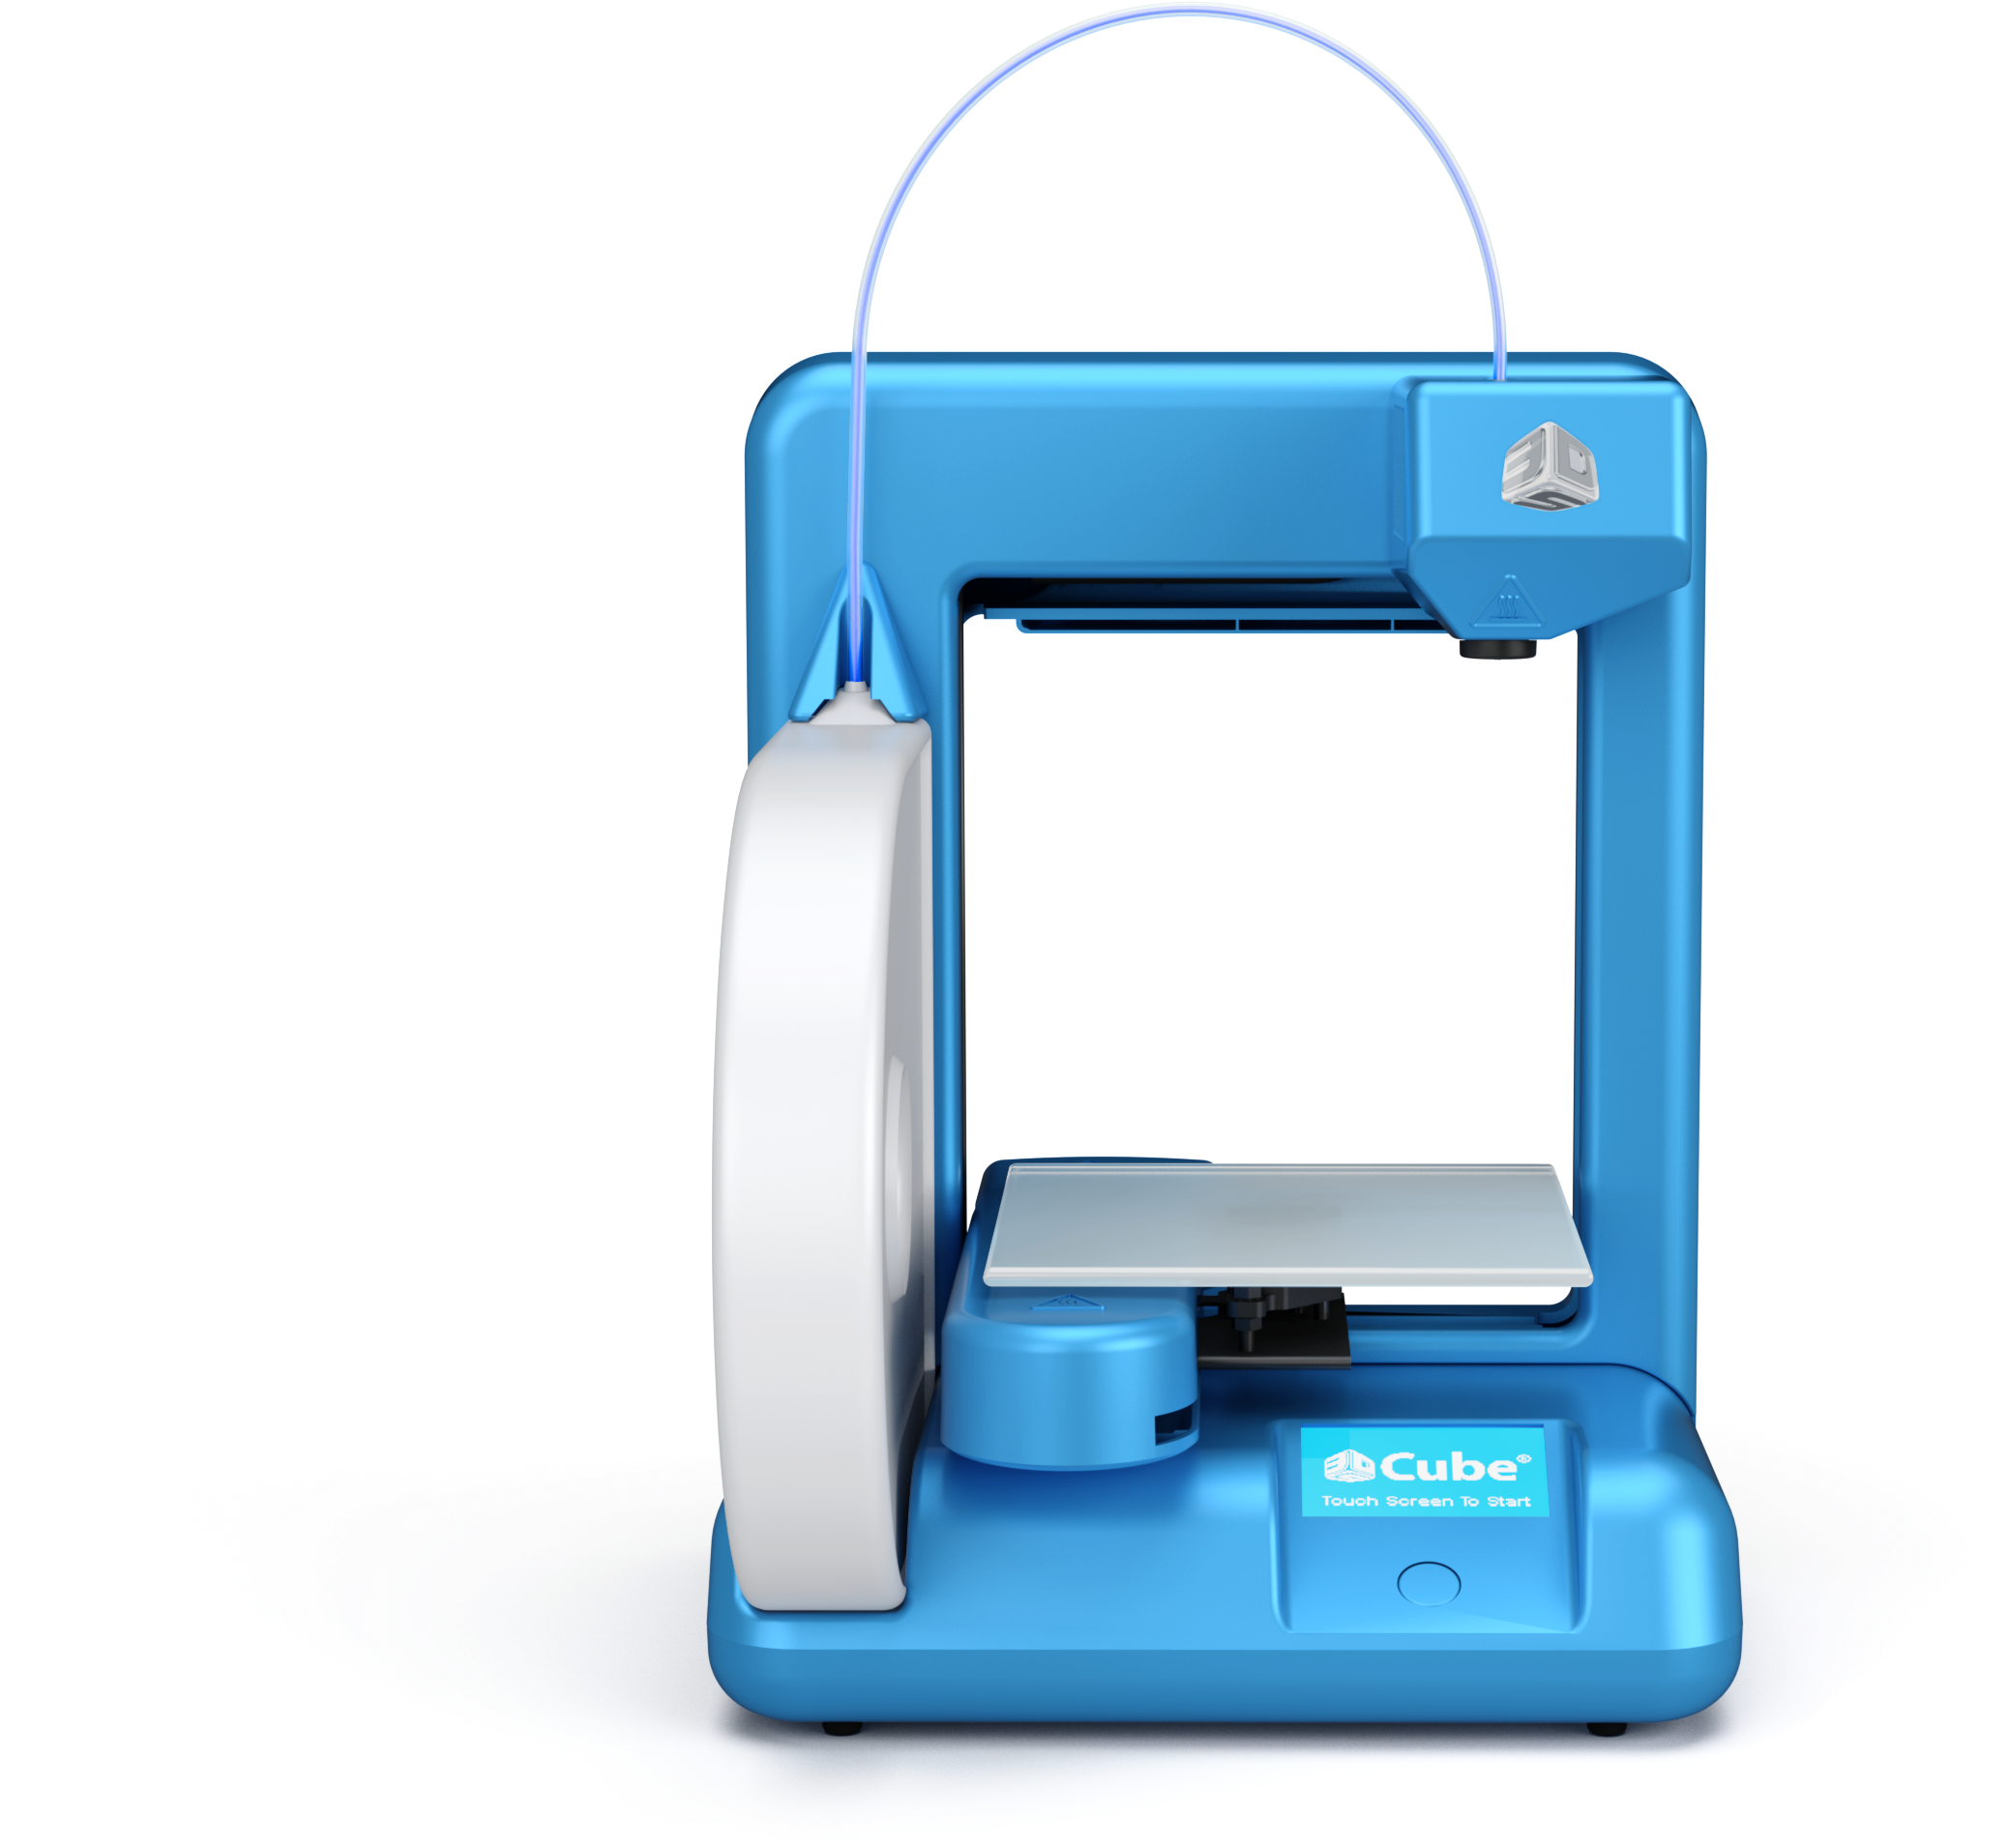 Office Depot Announces First Plans To Sell The Cube - 3d Systems Cube 2 Wireless 3d Printer (2500x2500), Png Download